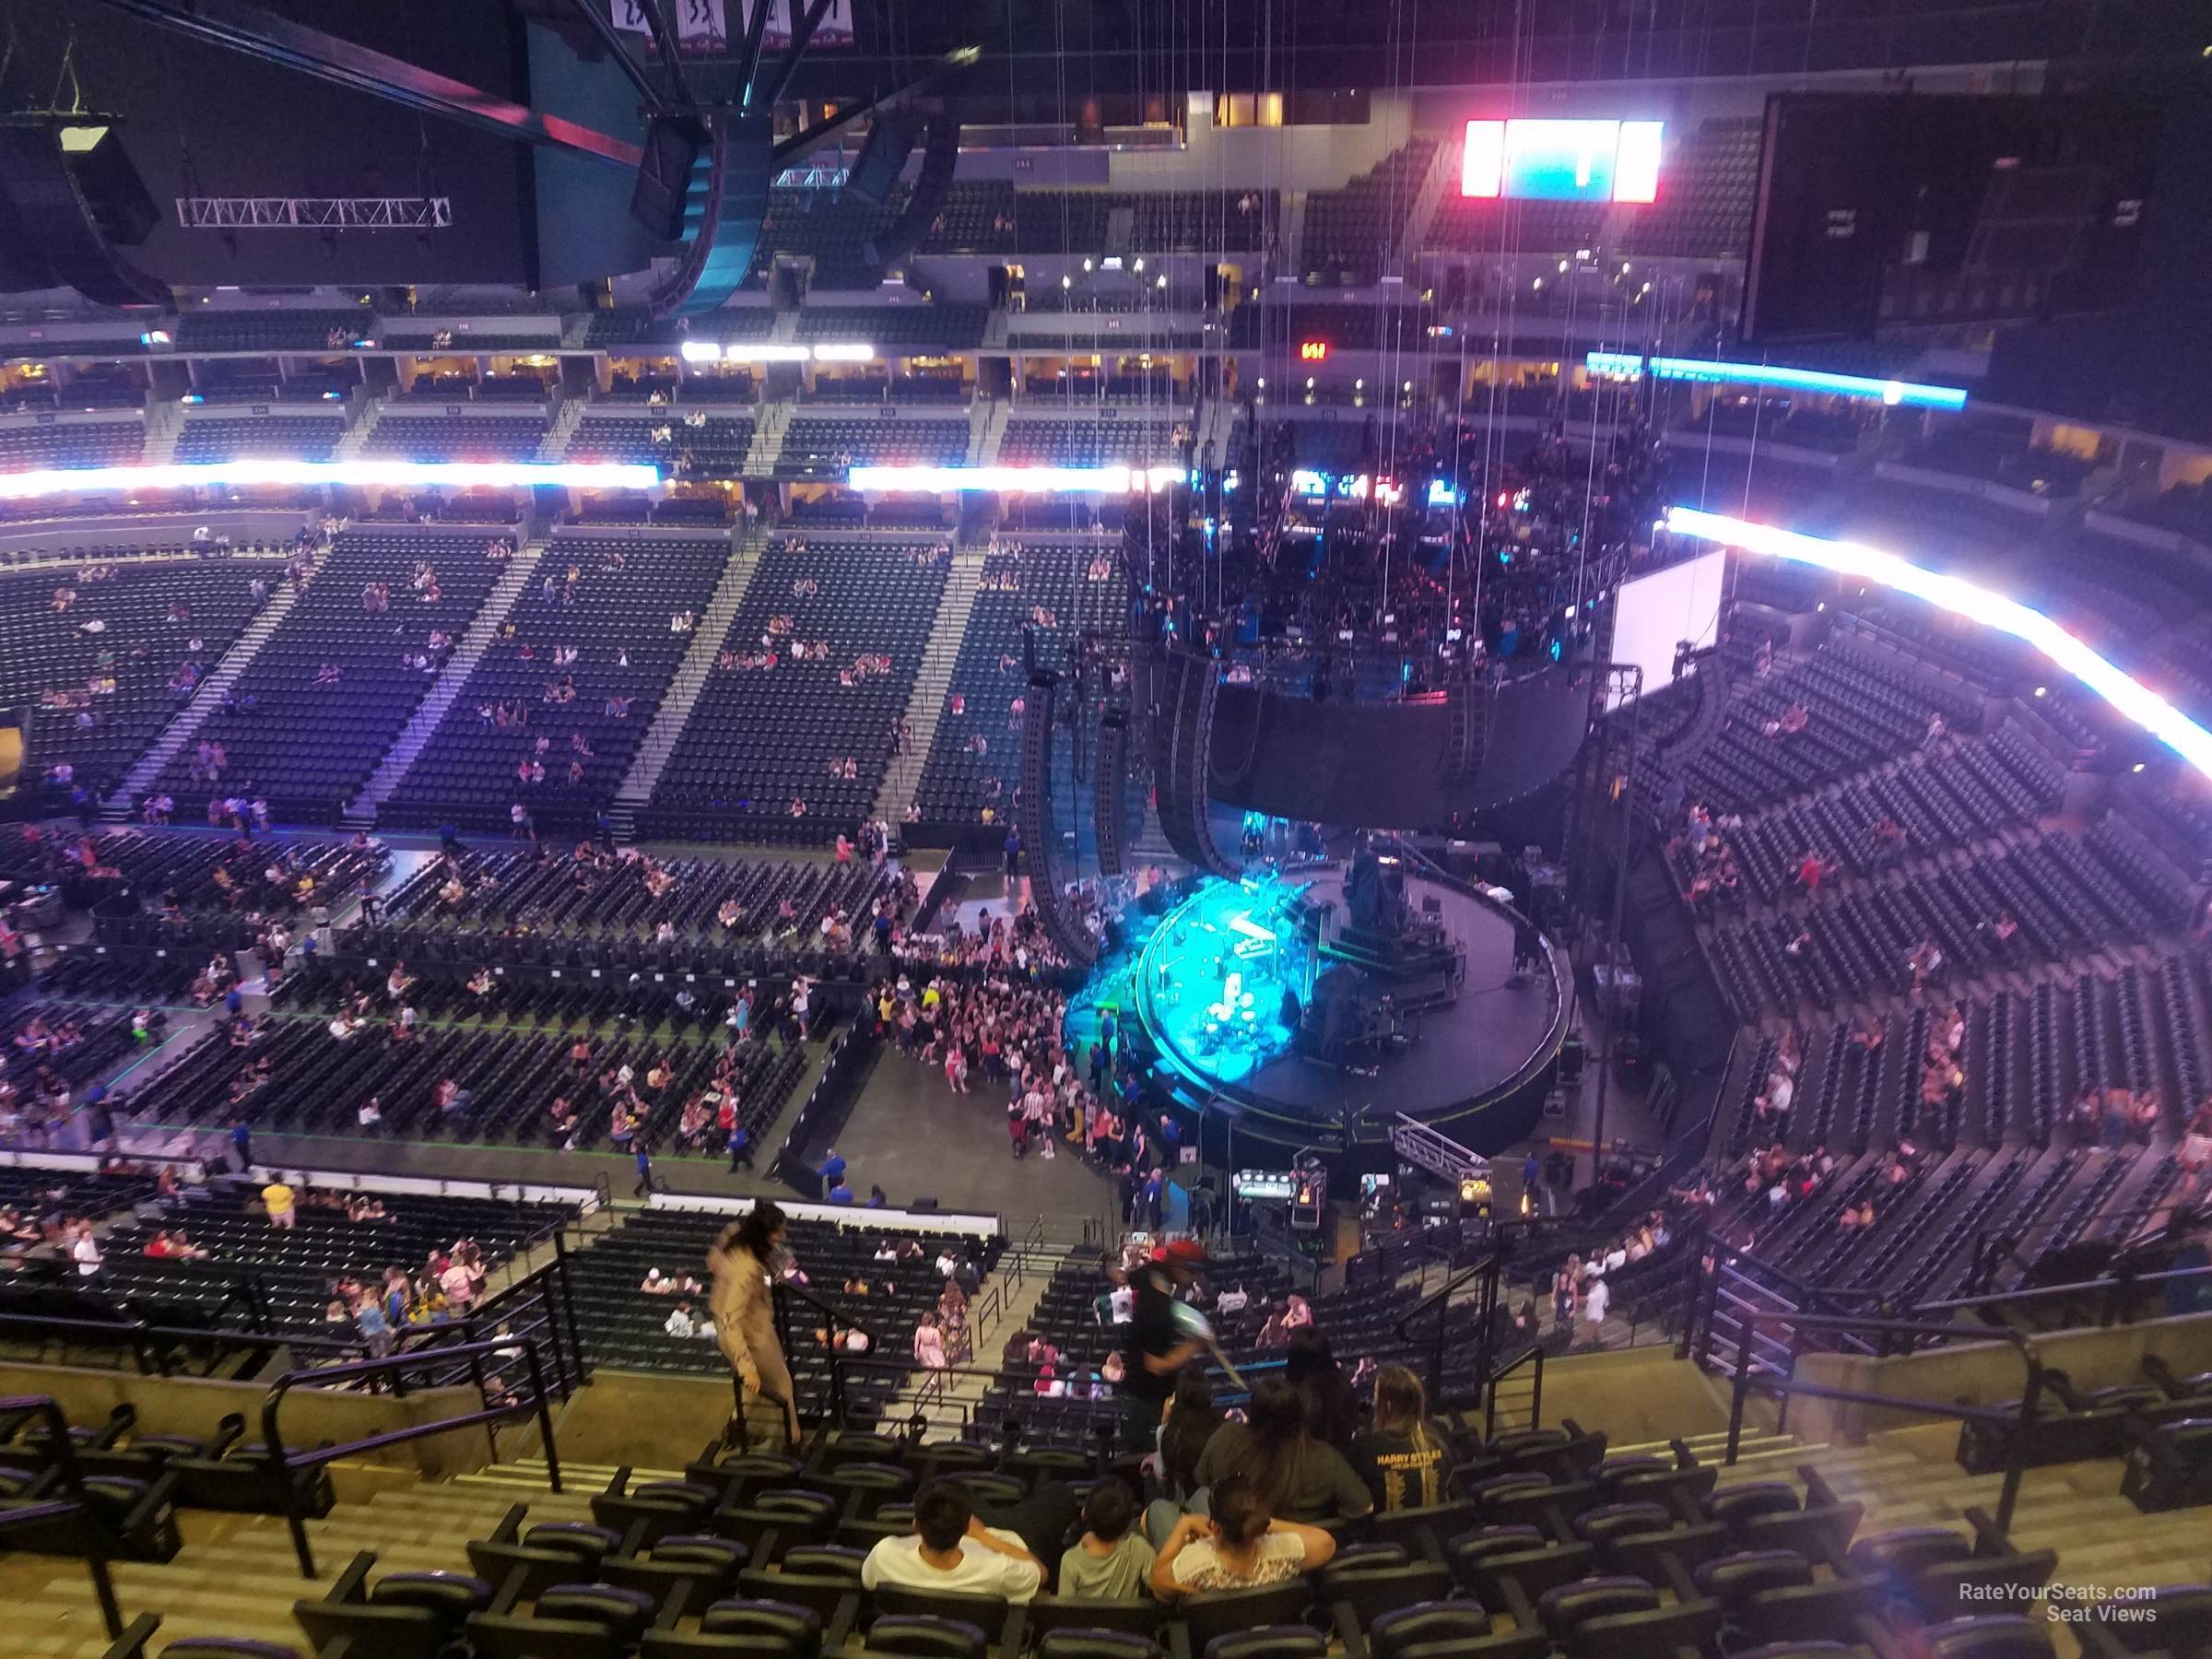 section 376, row 13 seat view  for concert - ball arena